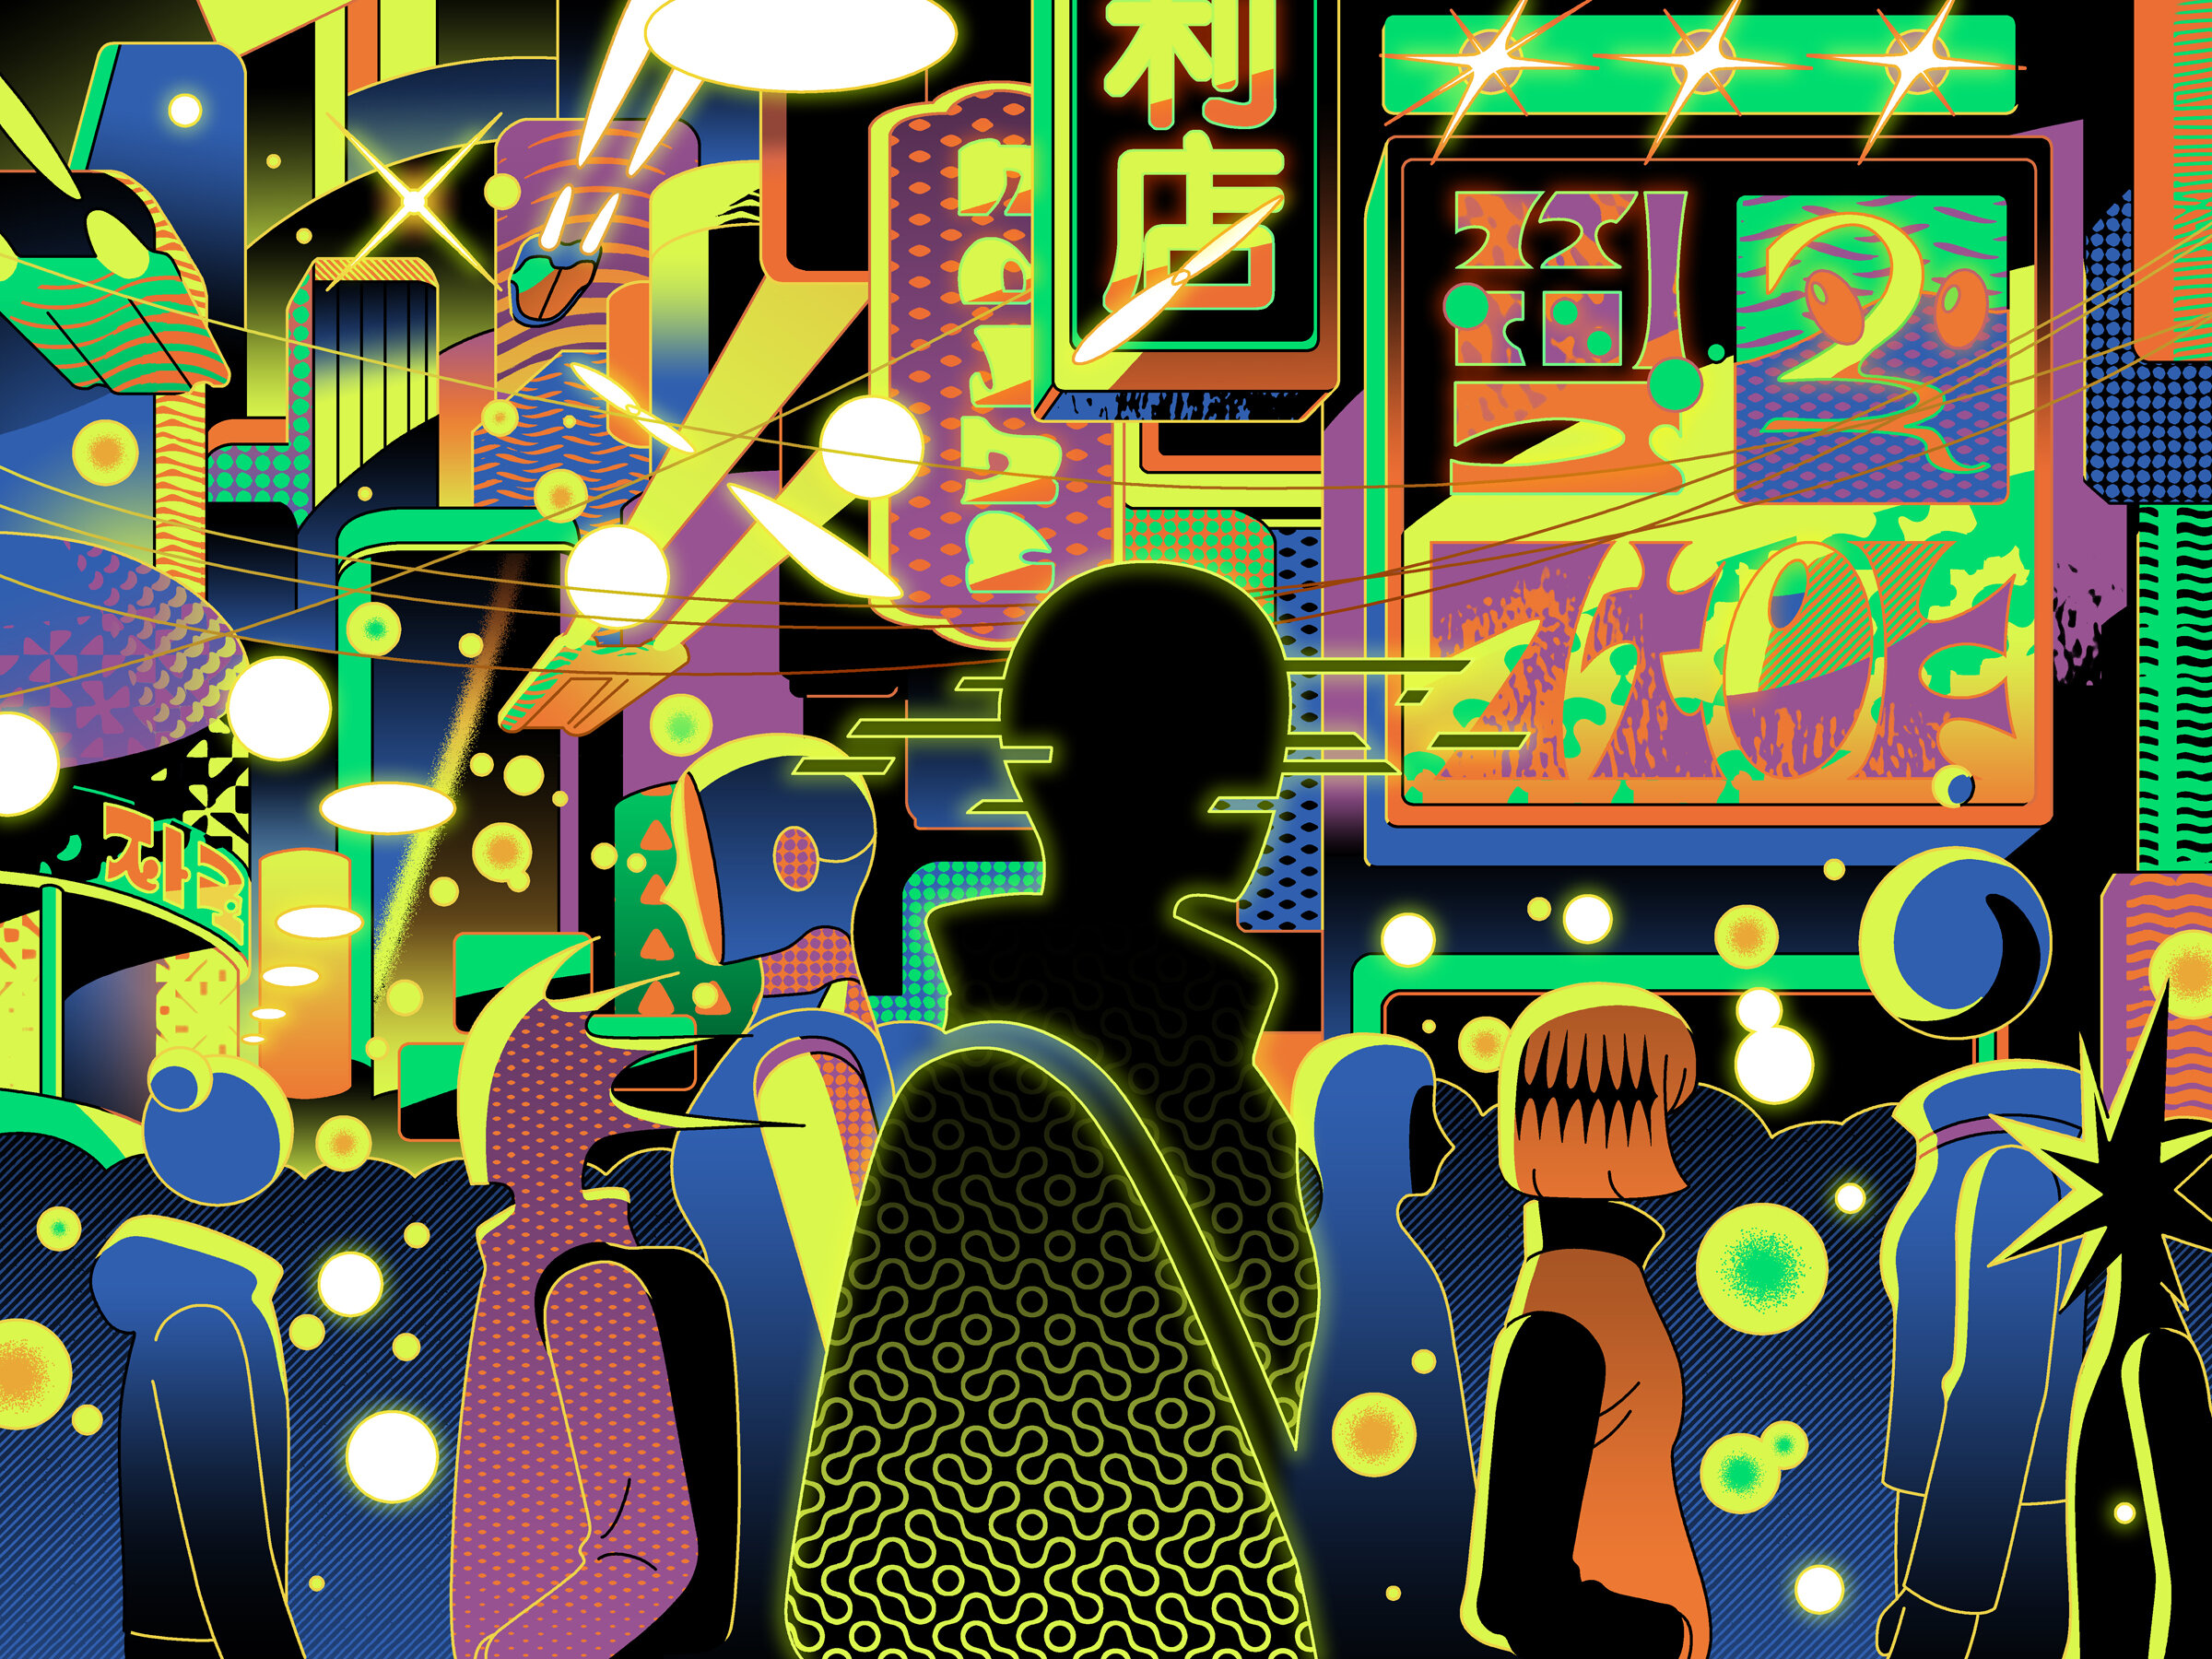 Jinhwa Jang - Illustration for Wired - Orientalism, Cyberpunk 2077, and Yellow Peril in Science Fiction, 2020, Digital.jpg